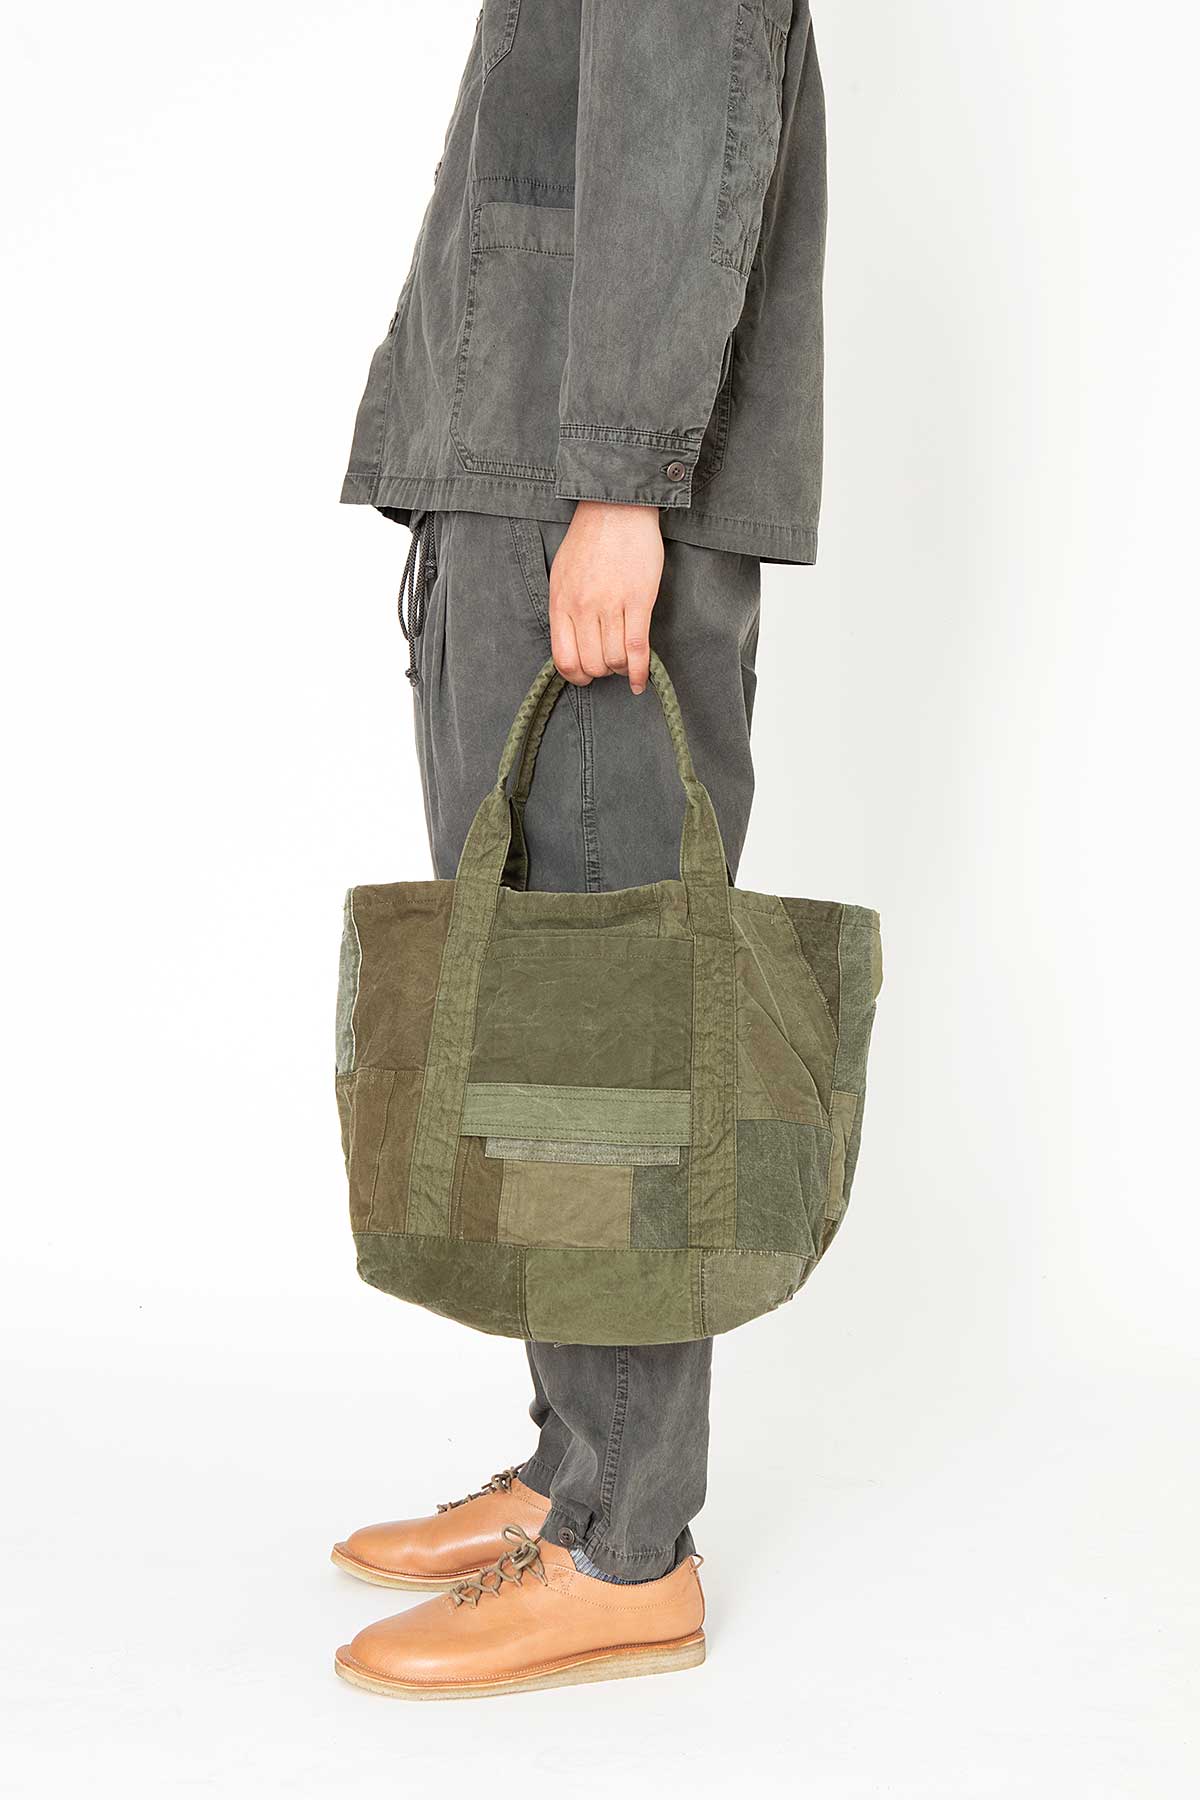 CARRY-ALL TOTE M UPCYCLED US ARMY CLOTH | hobo